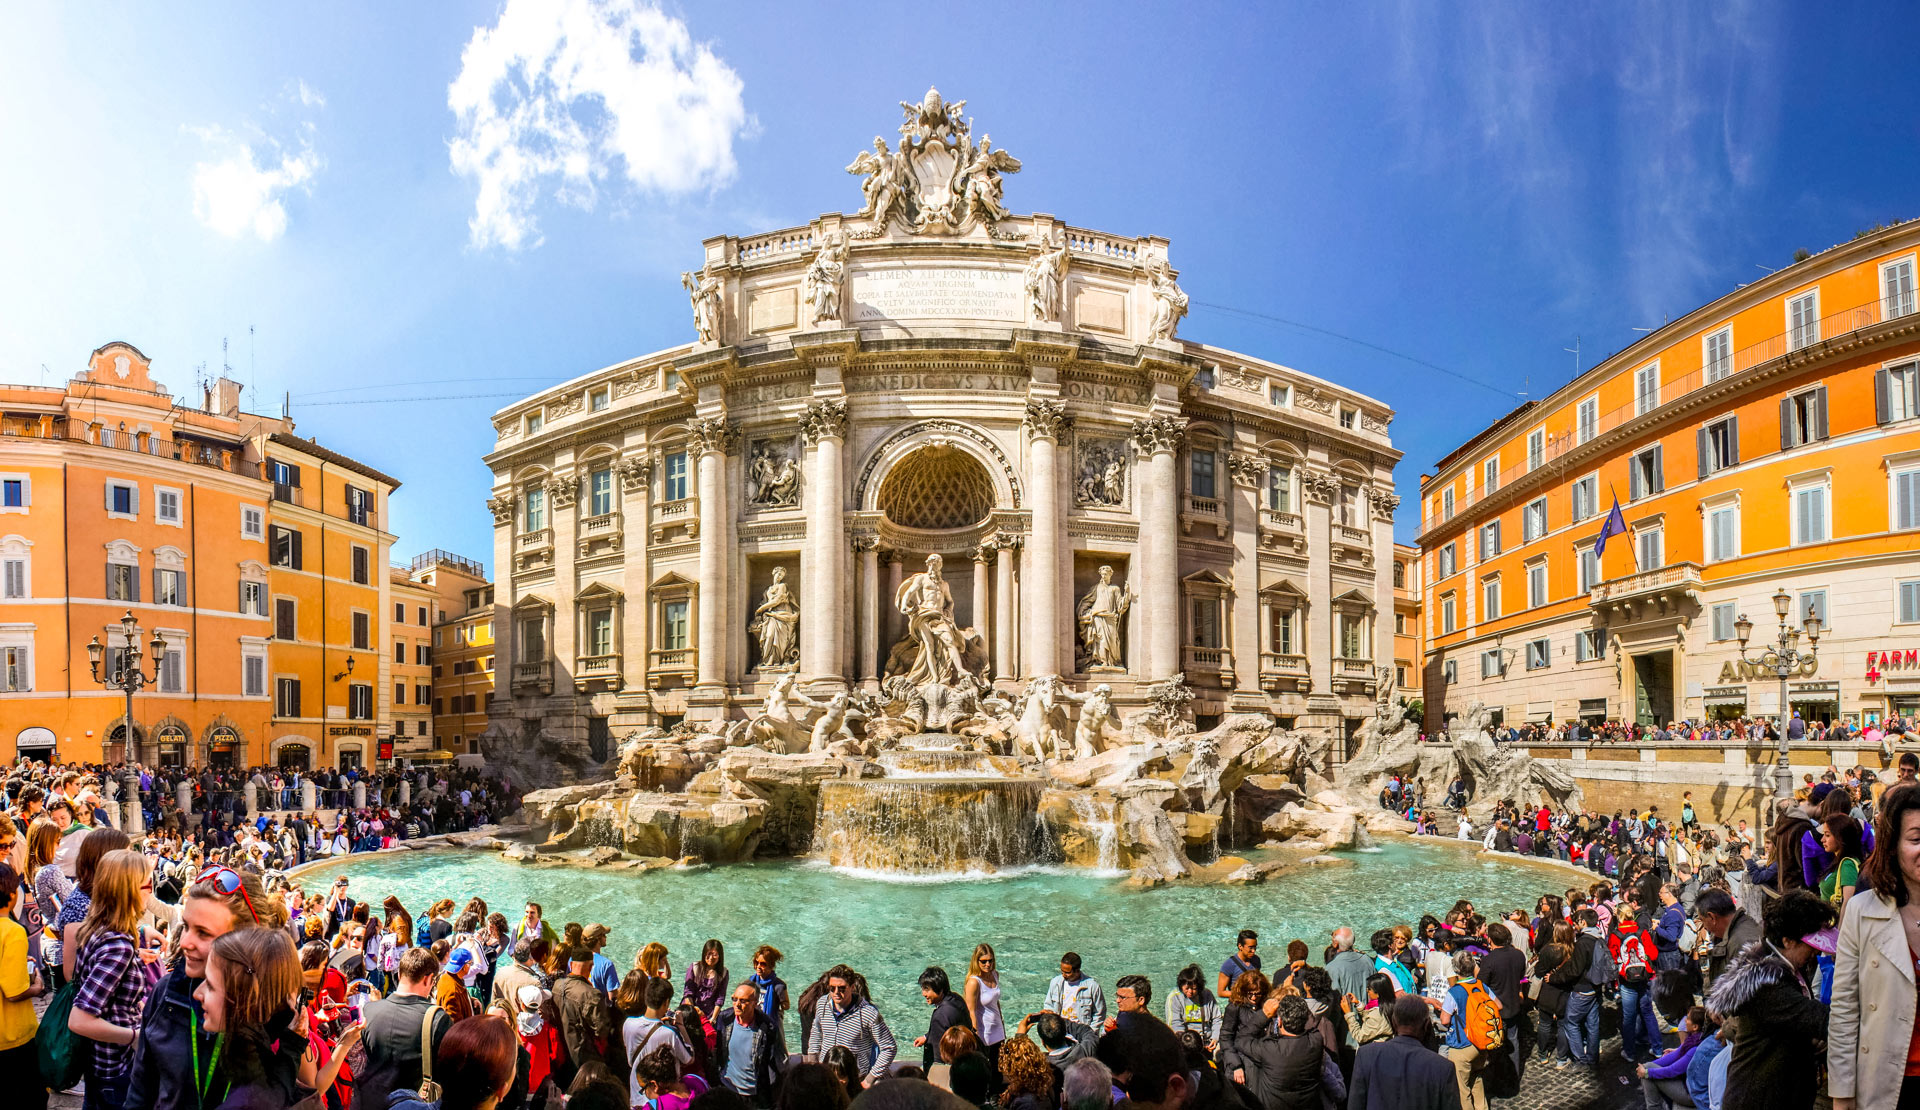 25 Best Things To Do In Rome Places To Visit And Must See Italy Travel